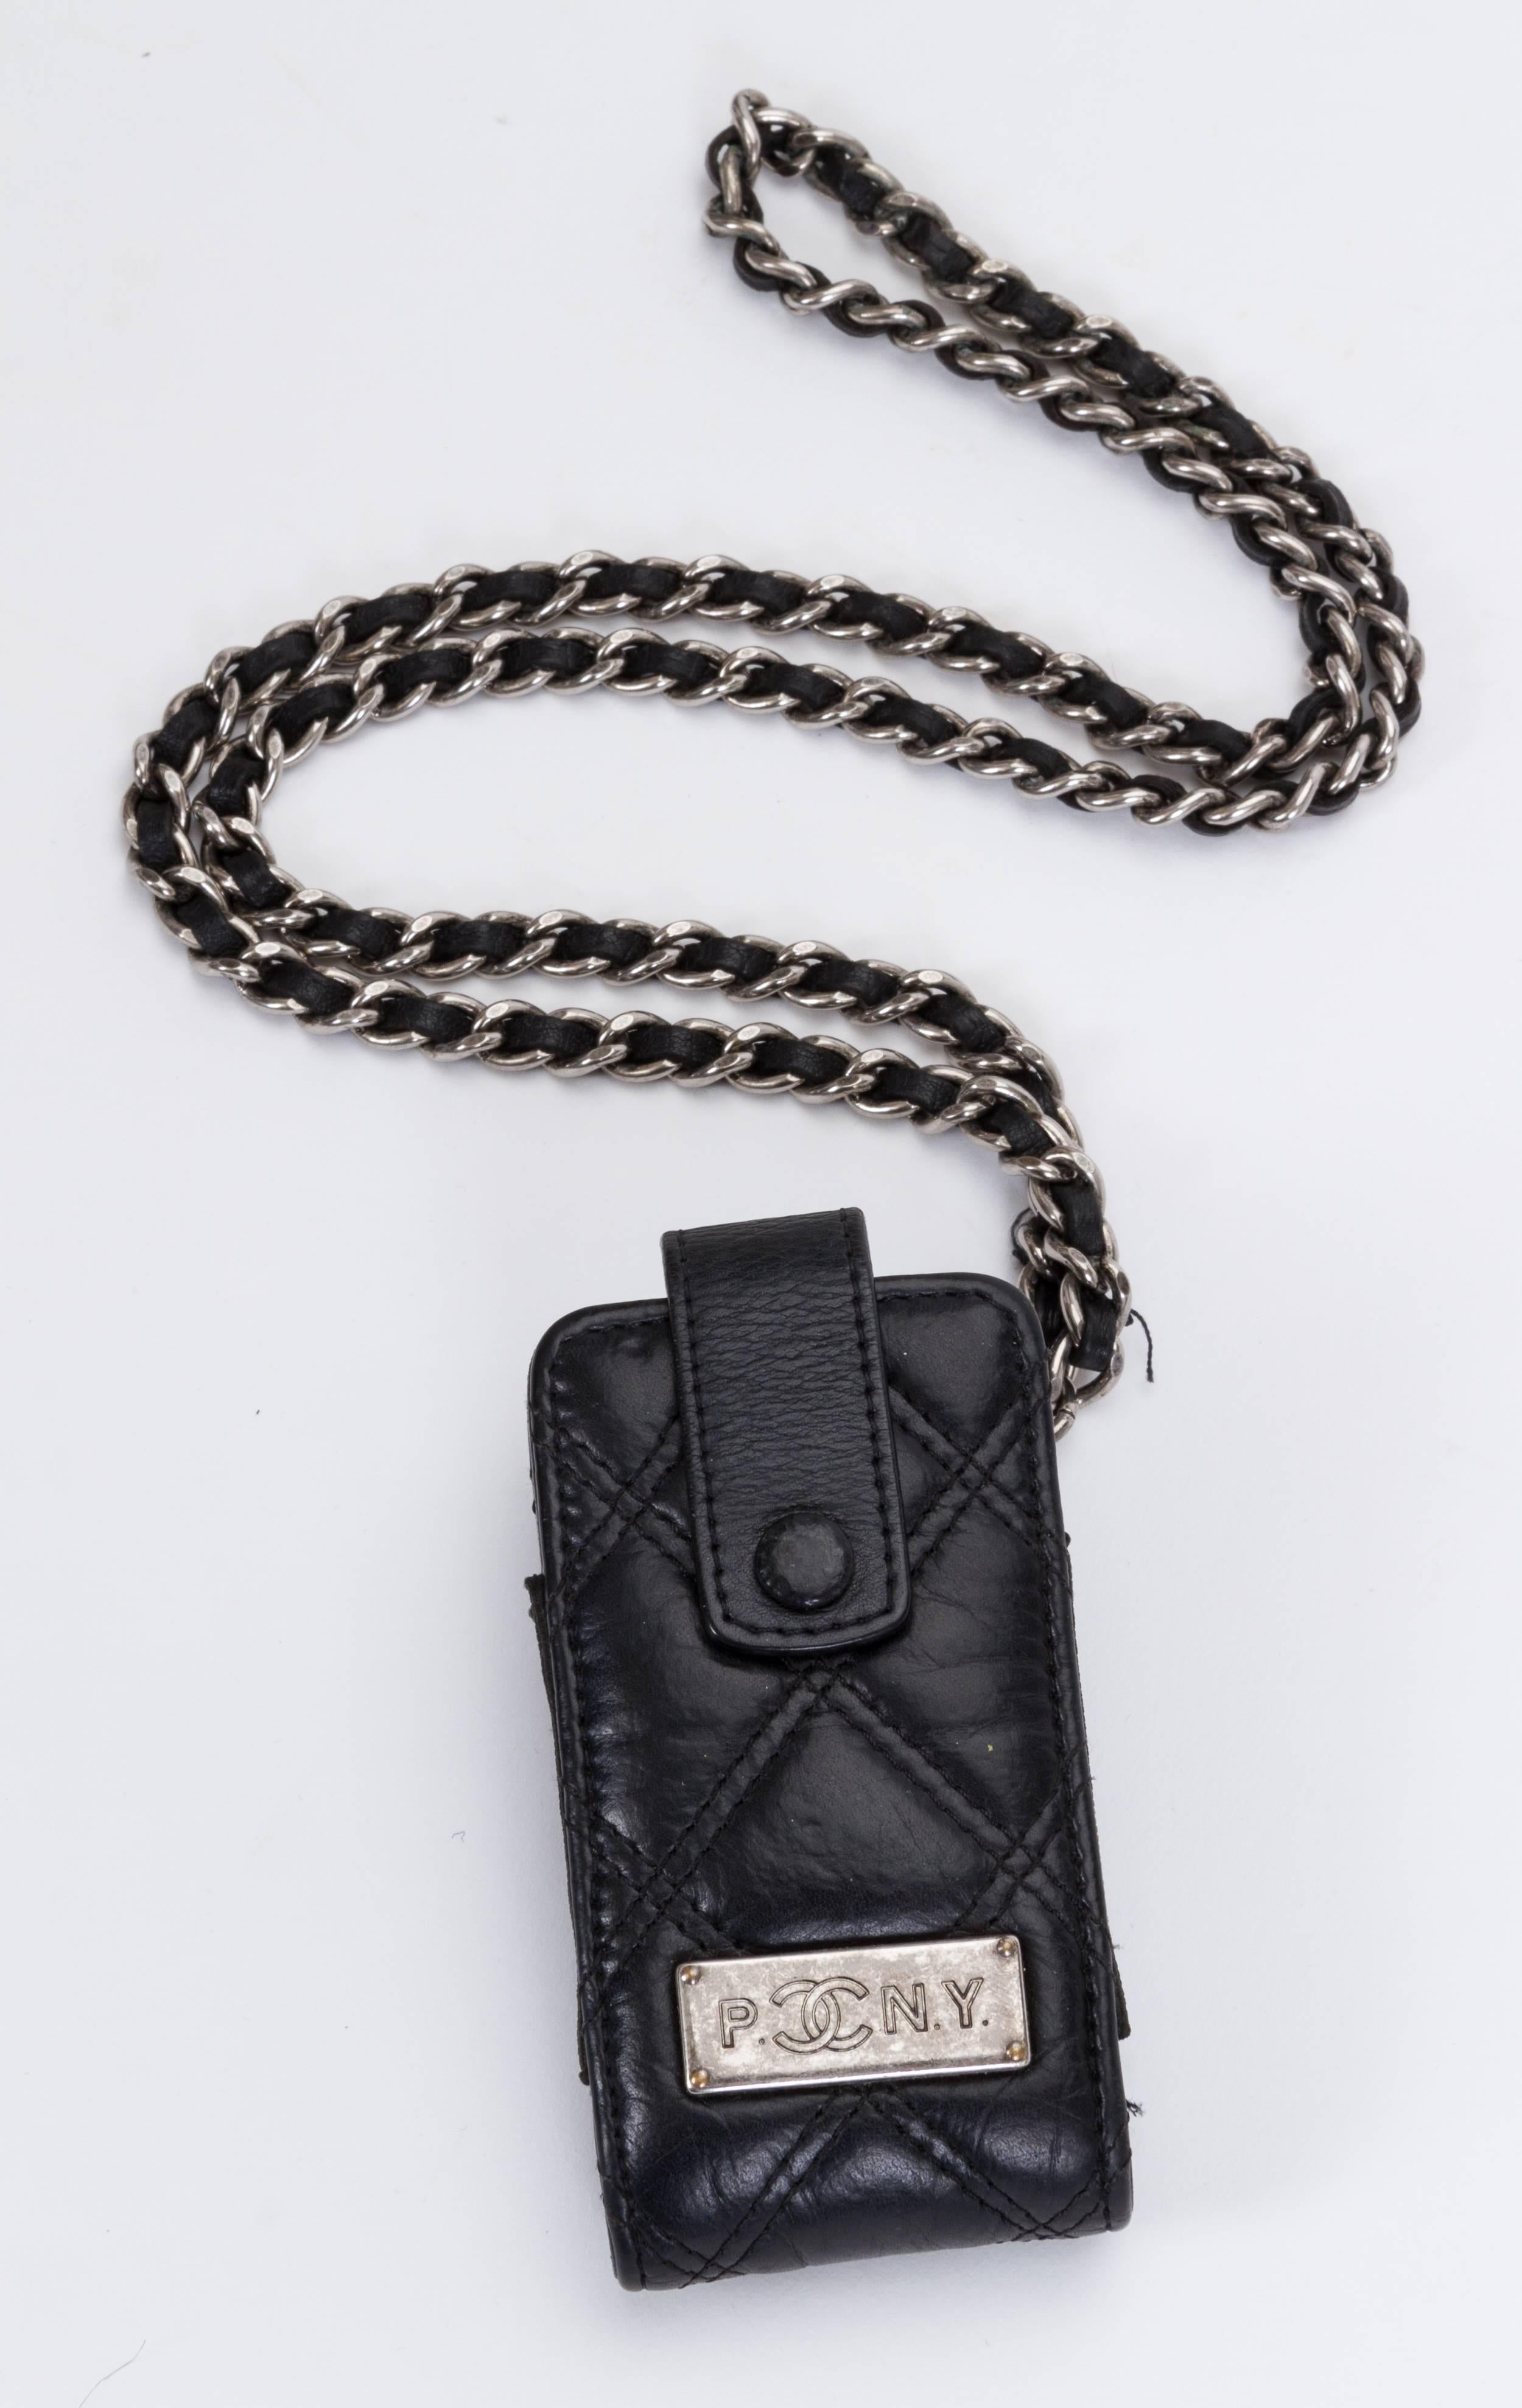 Chanel mini black distressed leather Paris/New York mini bag. Shoulder drop, 16"L. Collection 2005/2006. Comes with hologram and original dust cover.
